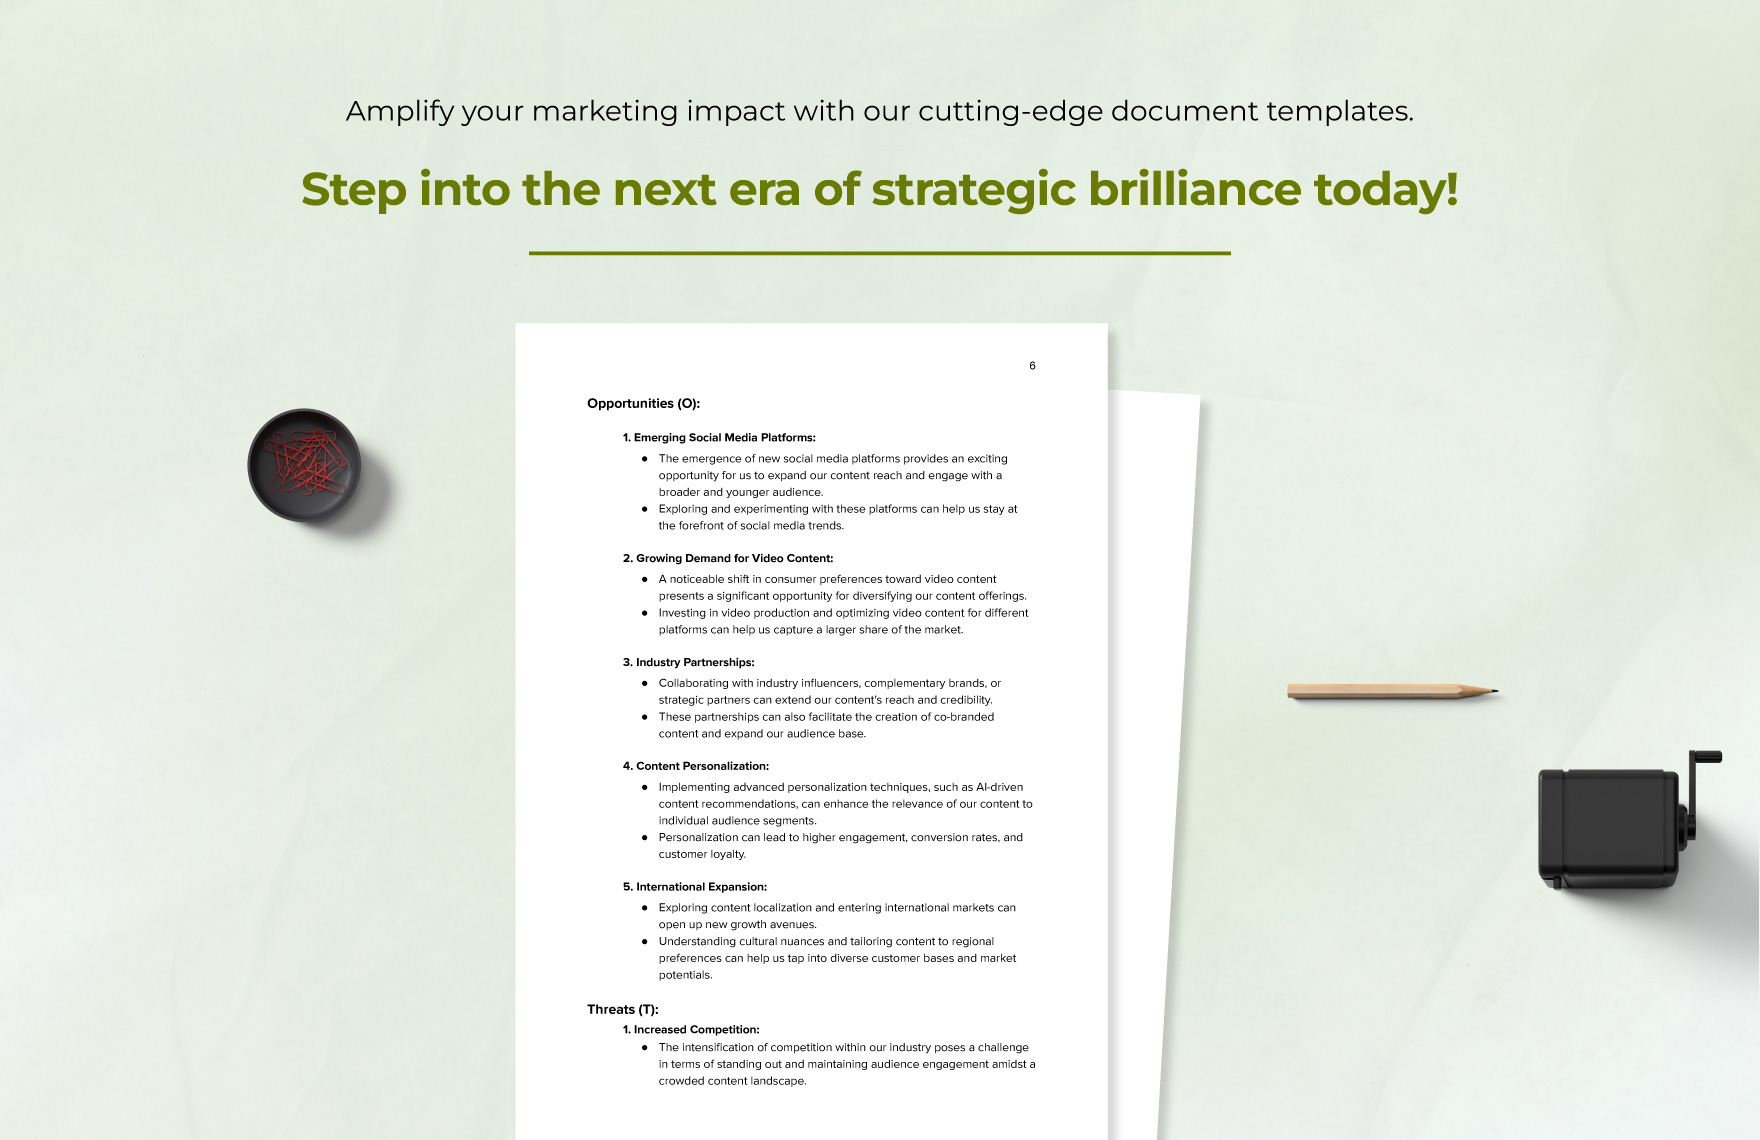 Marketing Content SWOT Analysis Template